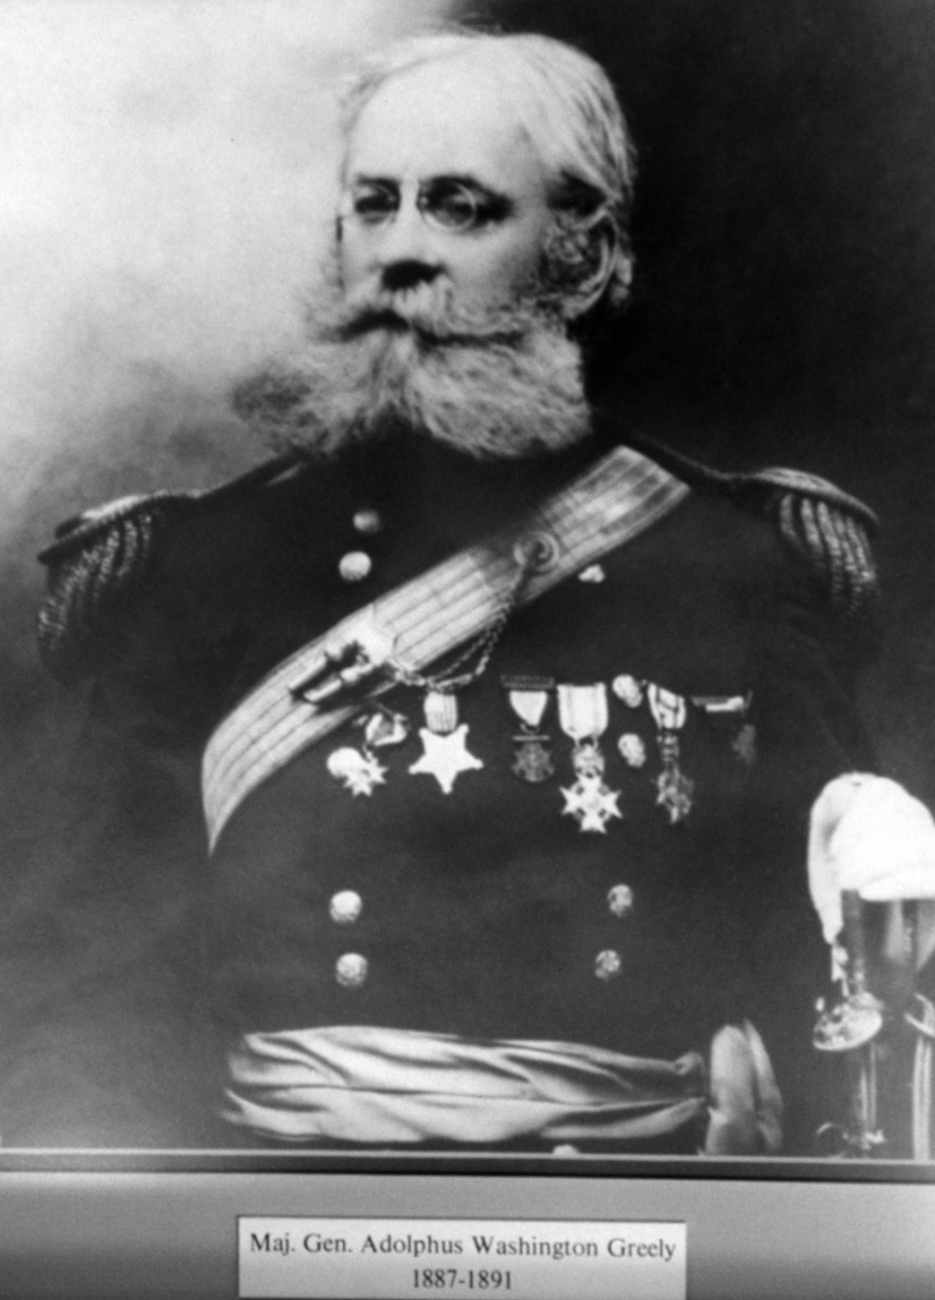 Major General Adolphus Washington Greely, head of the weather service, 1887-1891